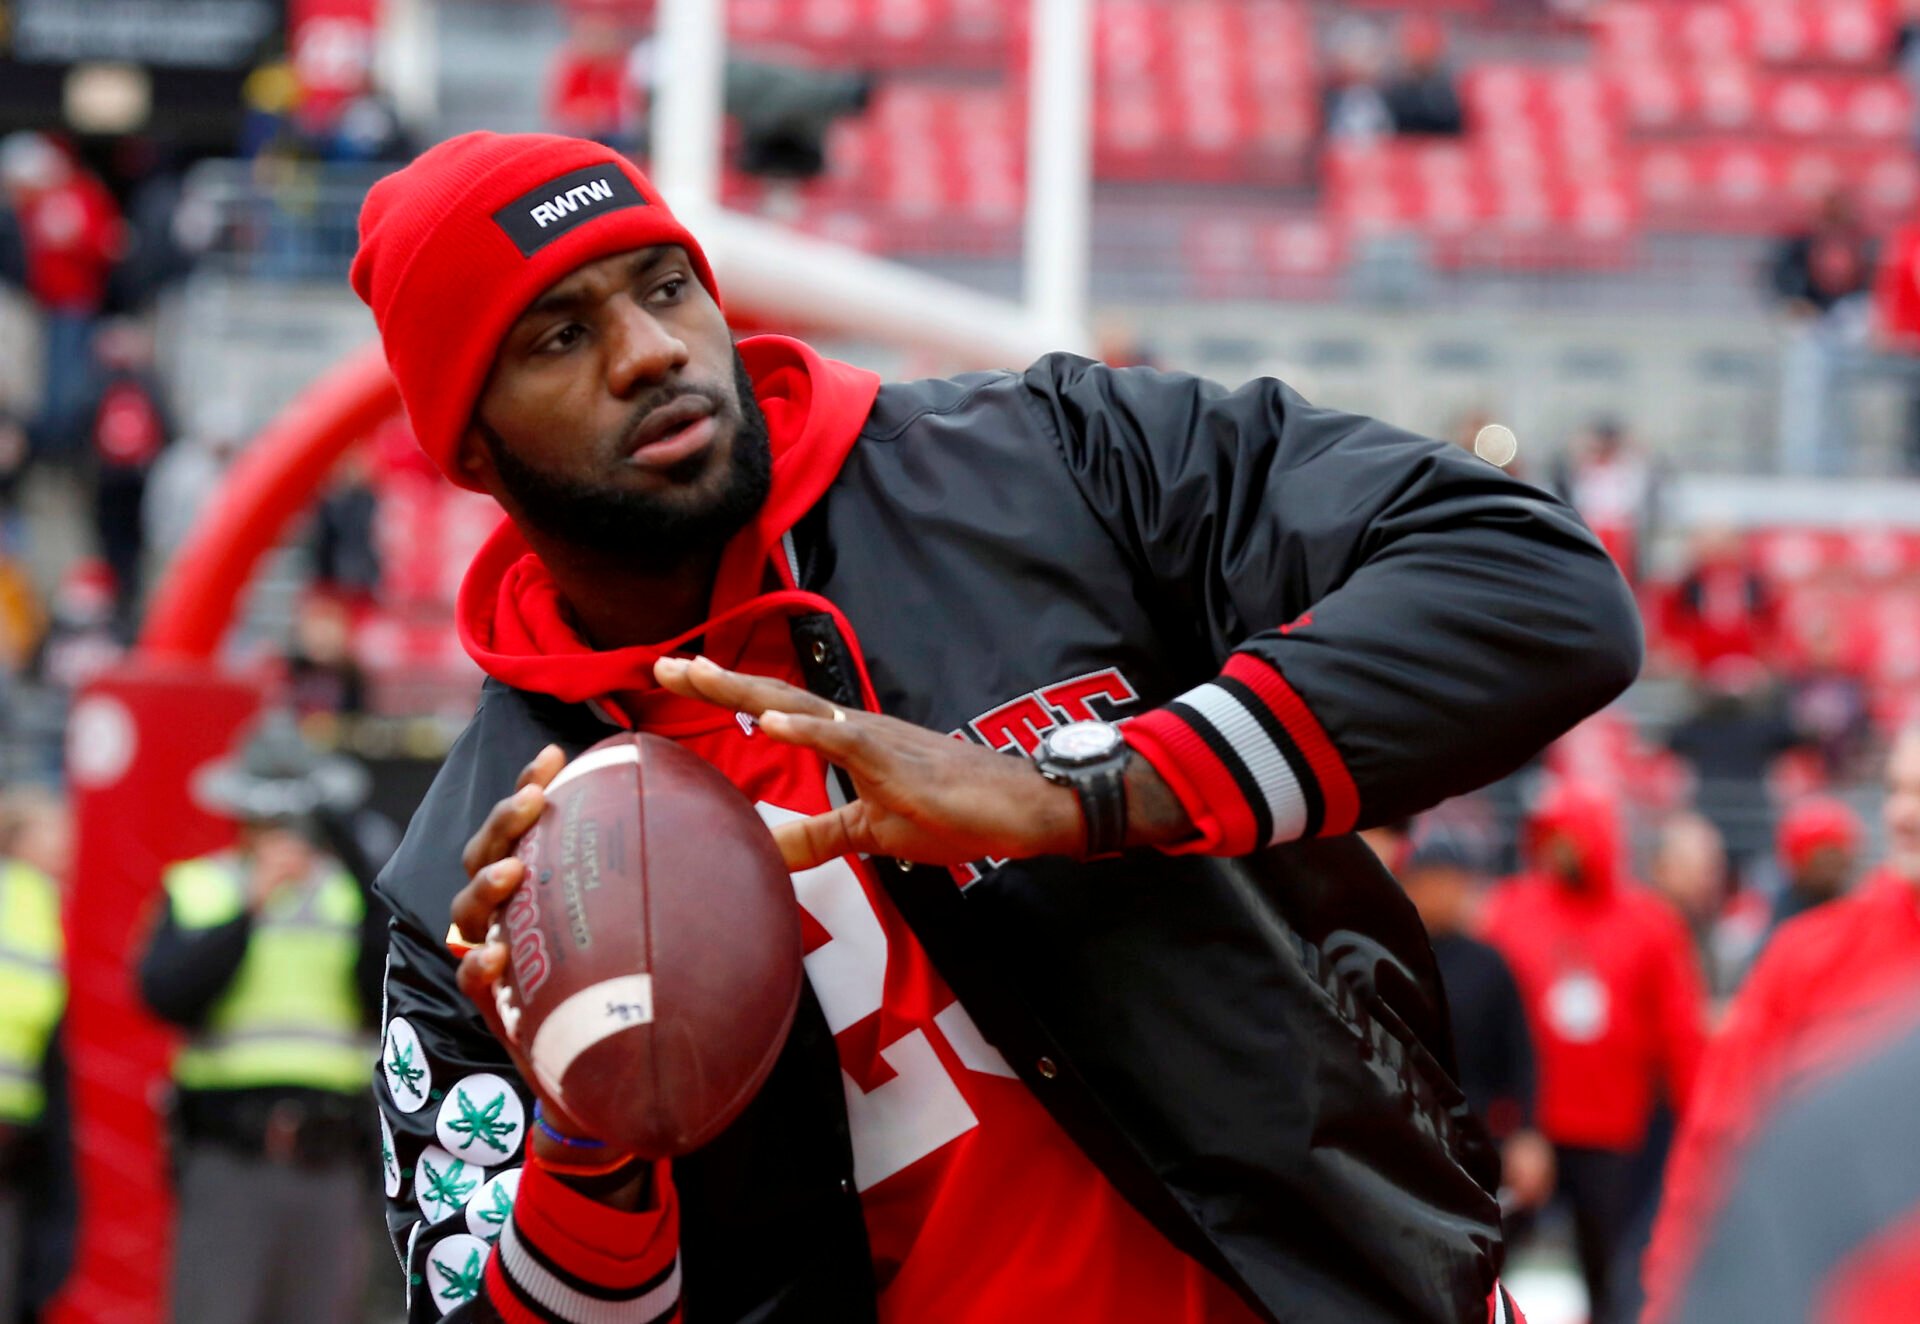 Cleveland Cavaliers player LeBron James plays catch with the Ohio State Buckeyes team before the game against the Michigan Wolverines at Ohio Stadium.